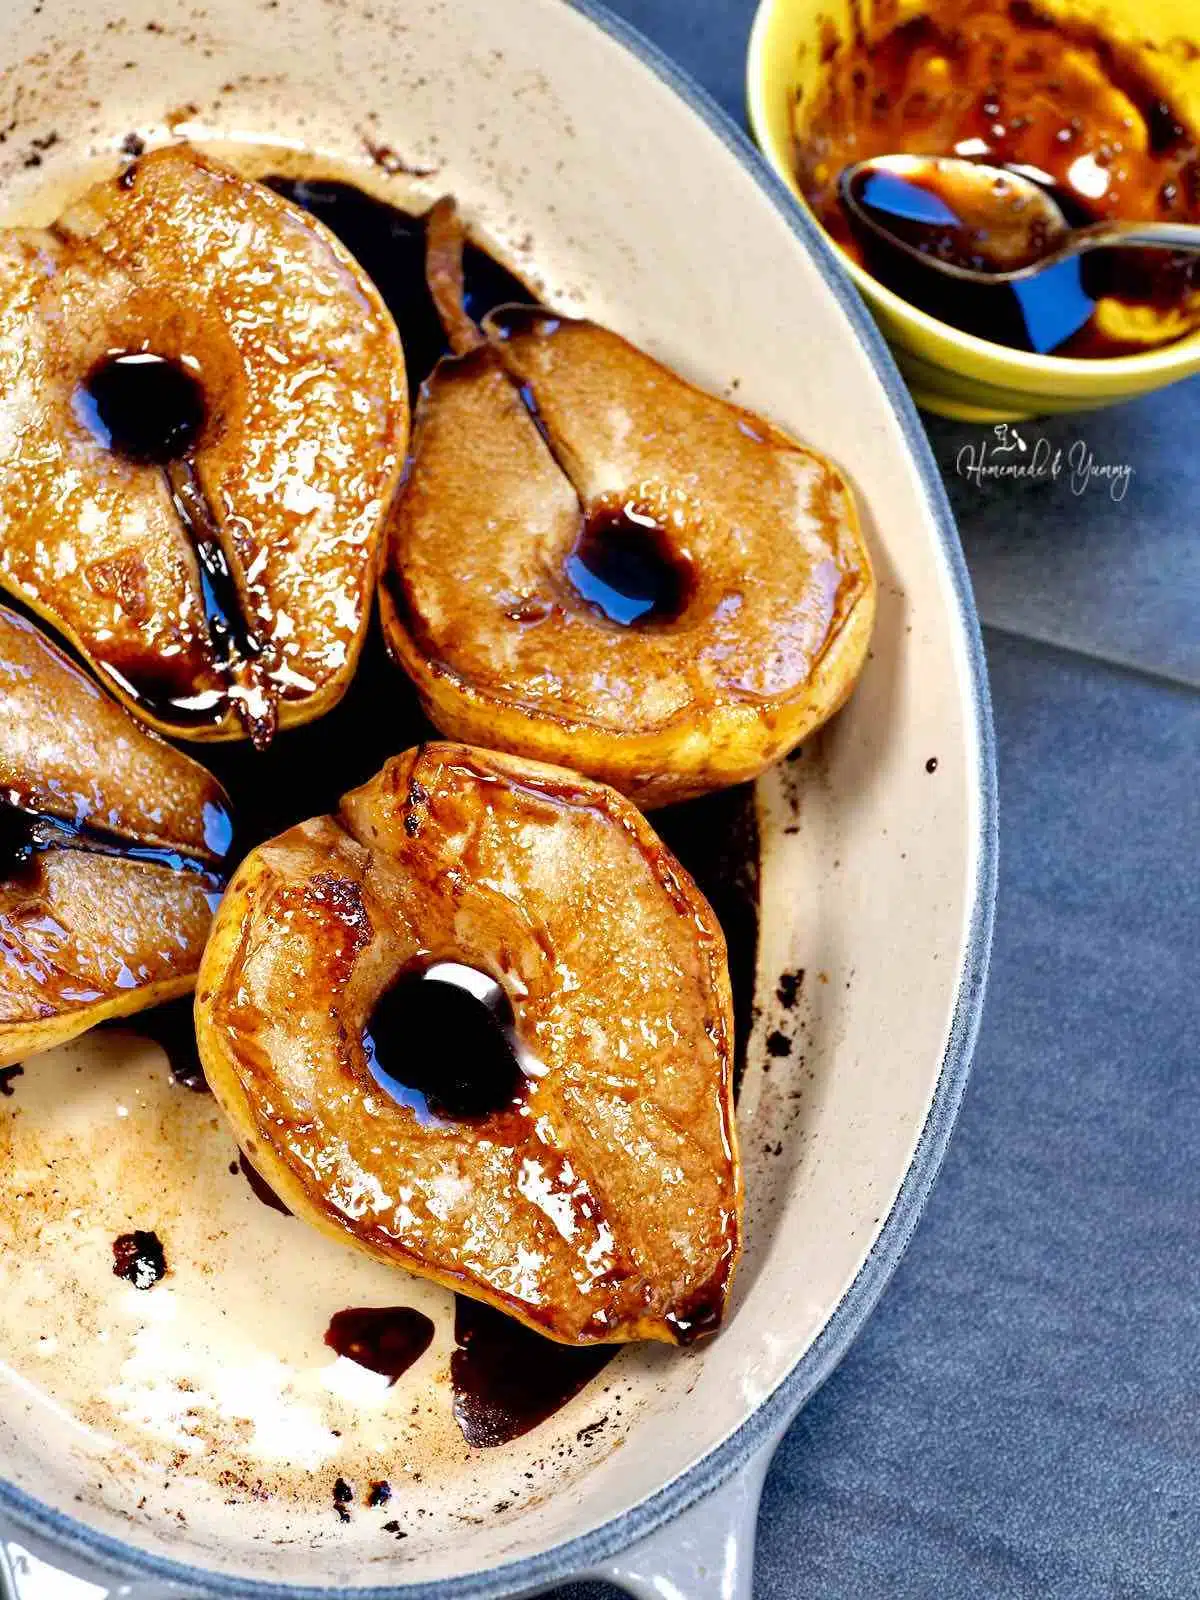 Espresso balsamic glazed pears roasted in the oven.